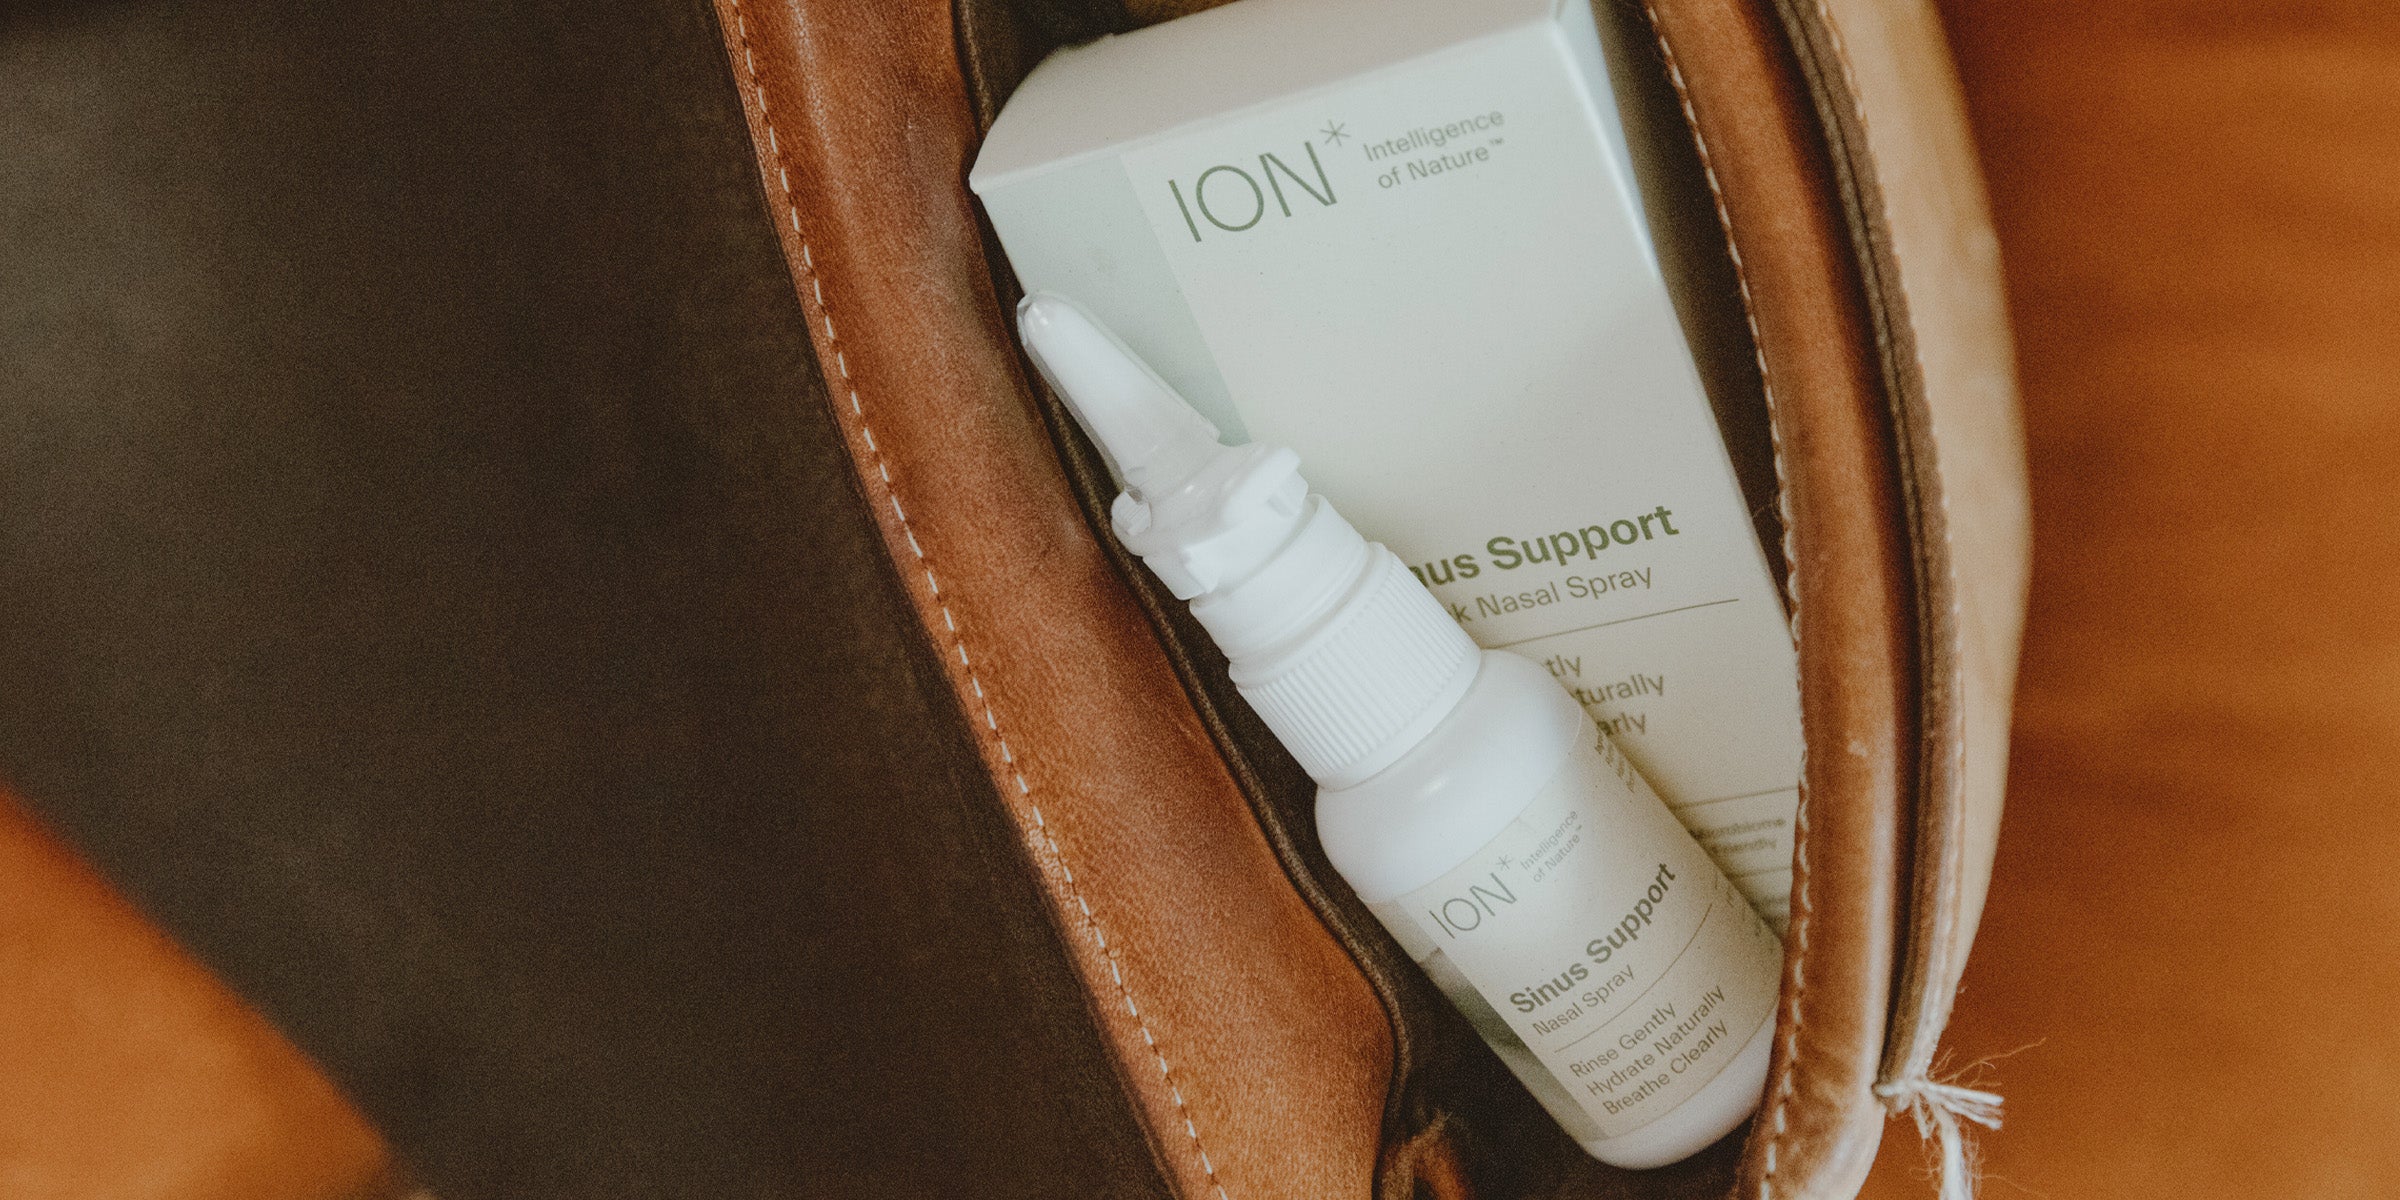 Make every breath count with ION* Sinus Support.